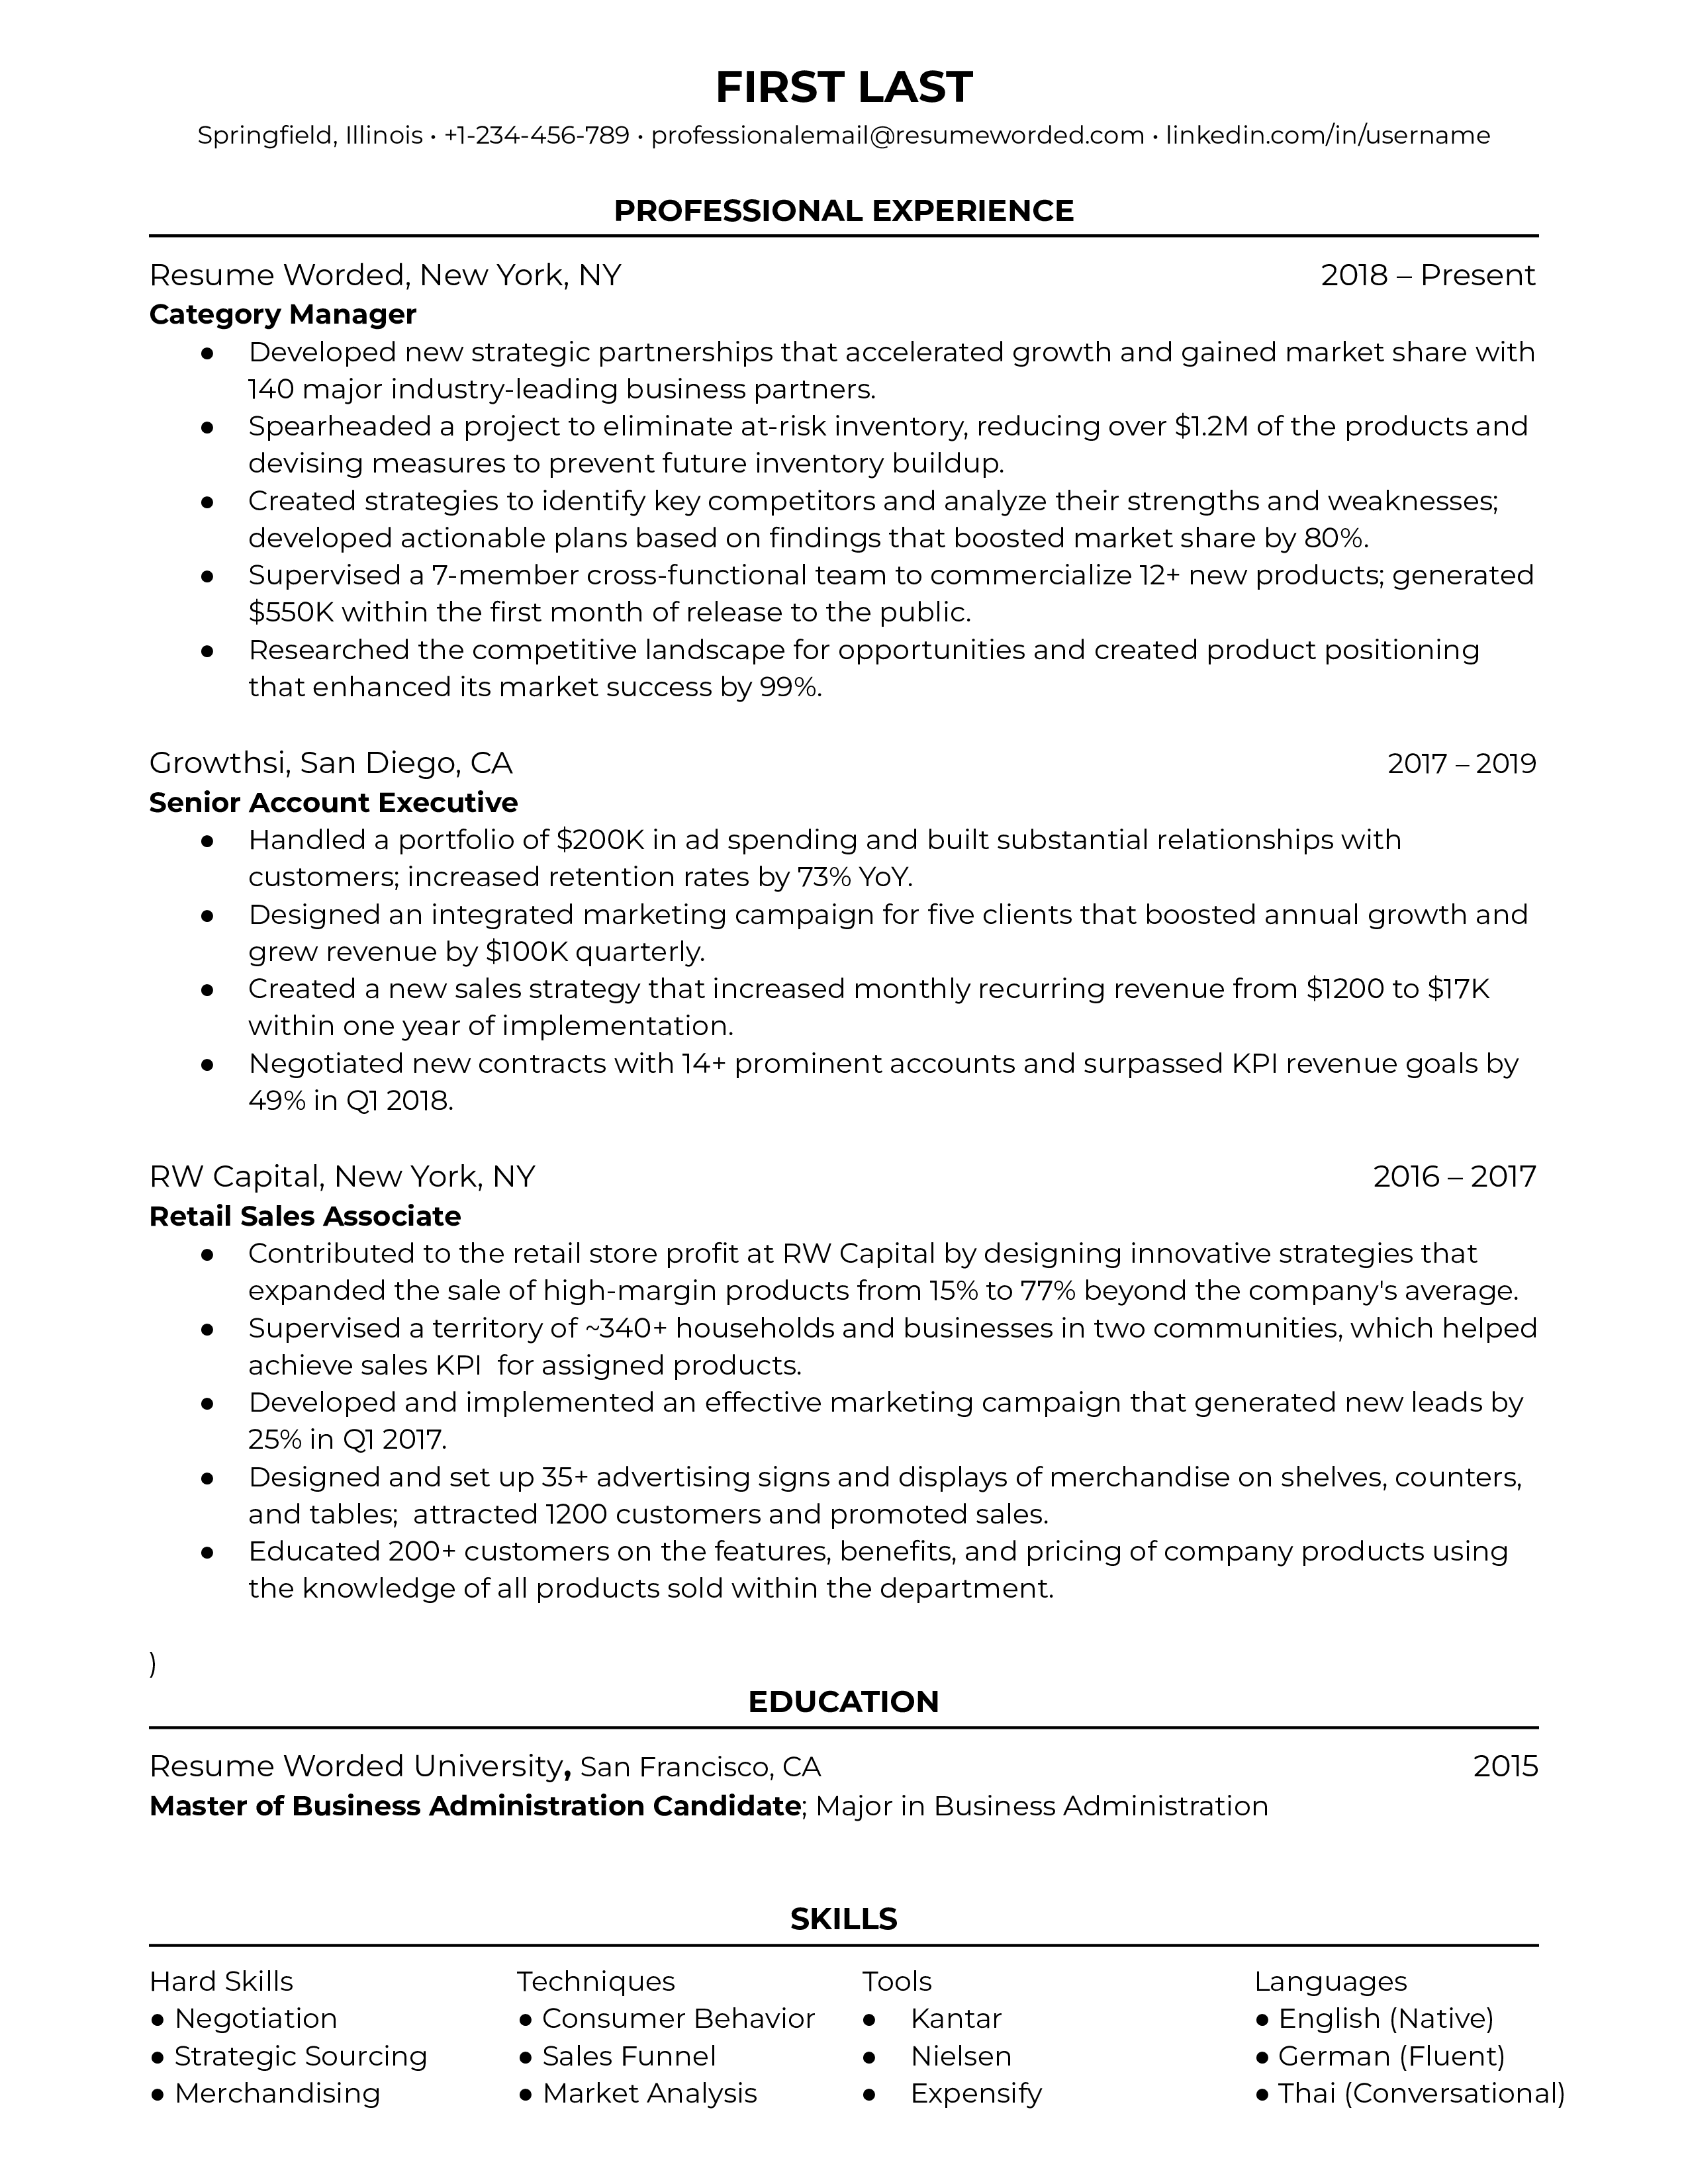 Category Manager Resume Sample